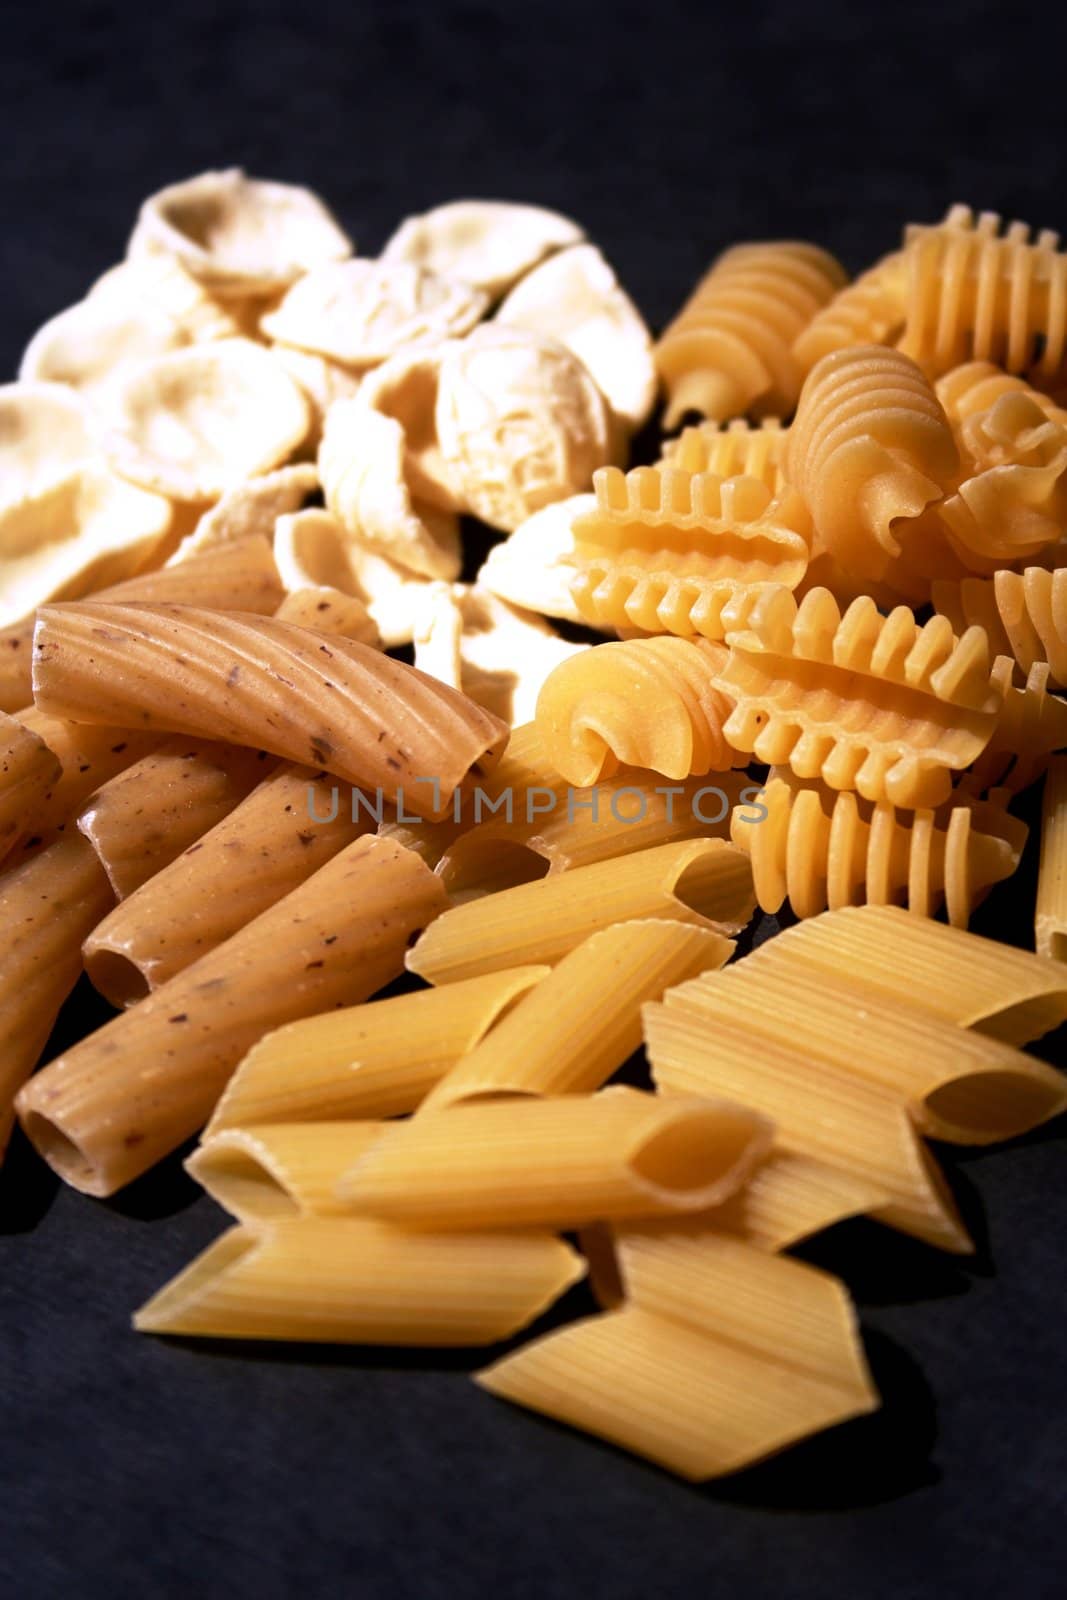 Some kind of pasta